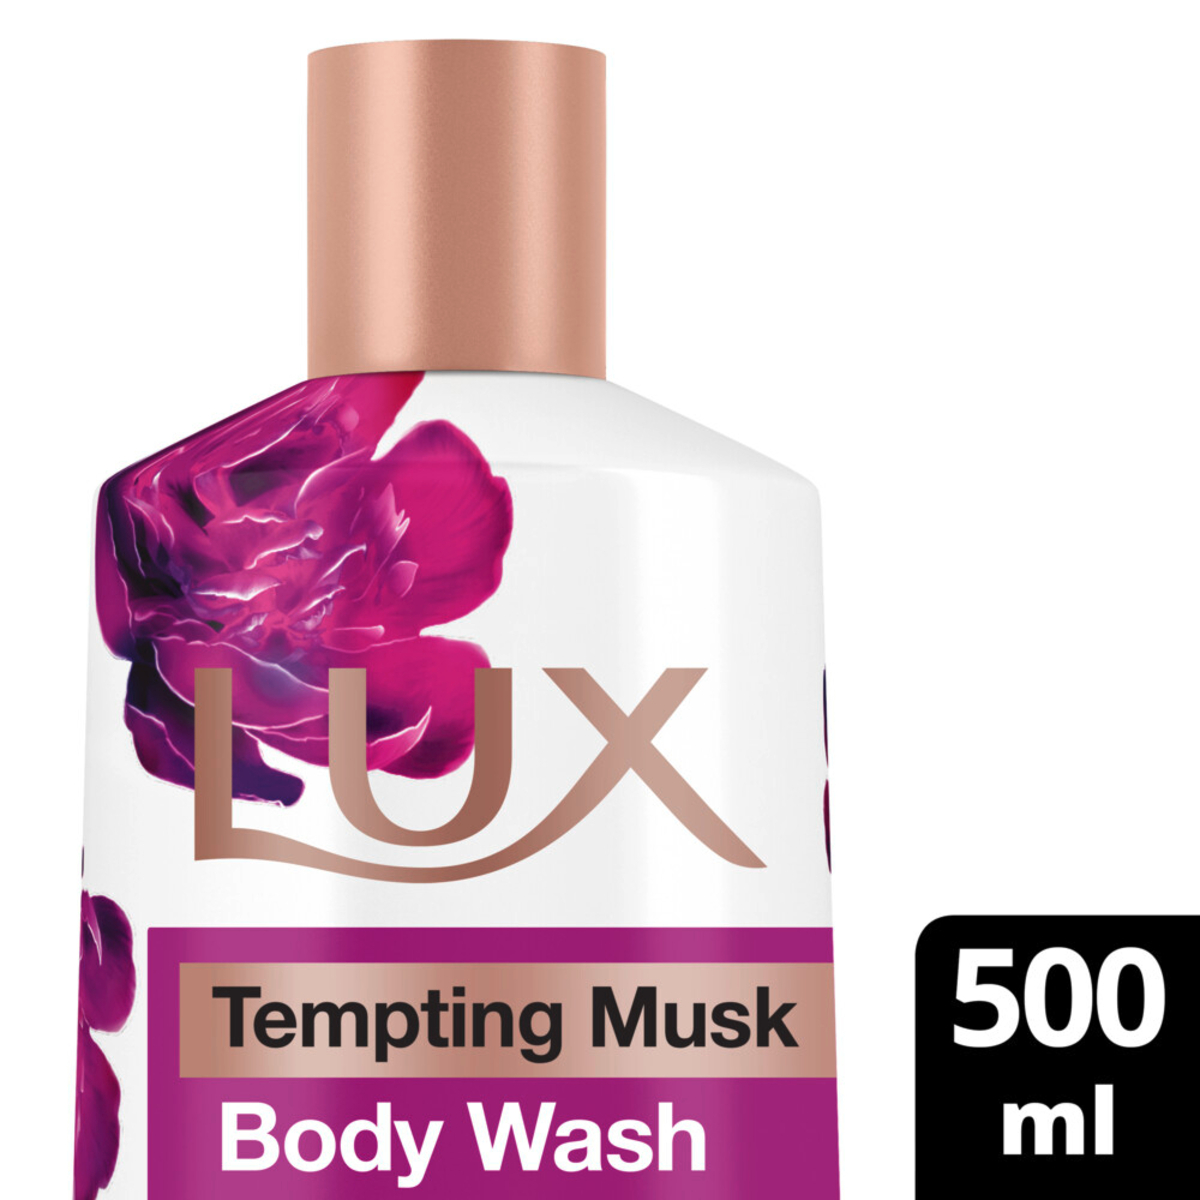 Lux Body Wash Tempting Musk Opulent Fragrance 500 ml